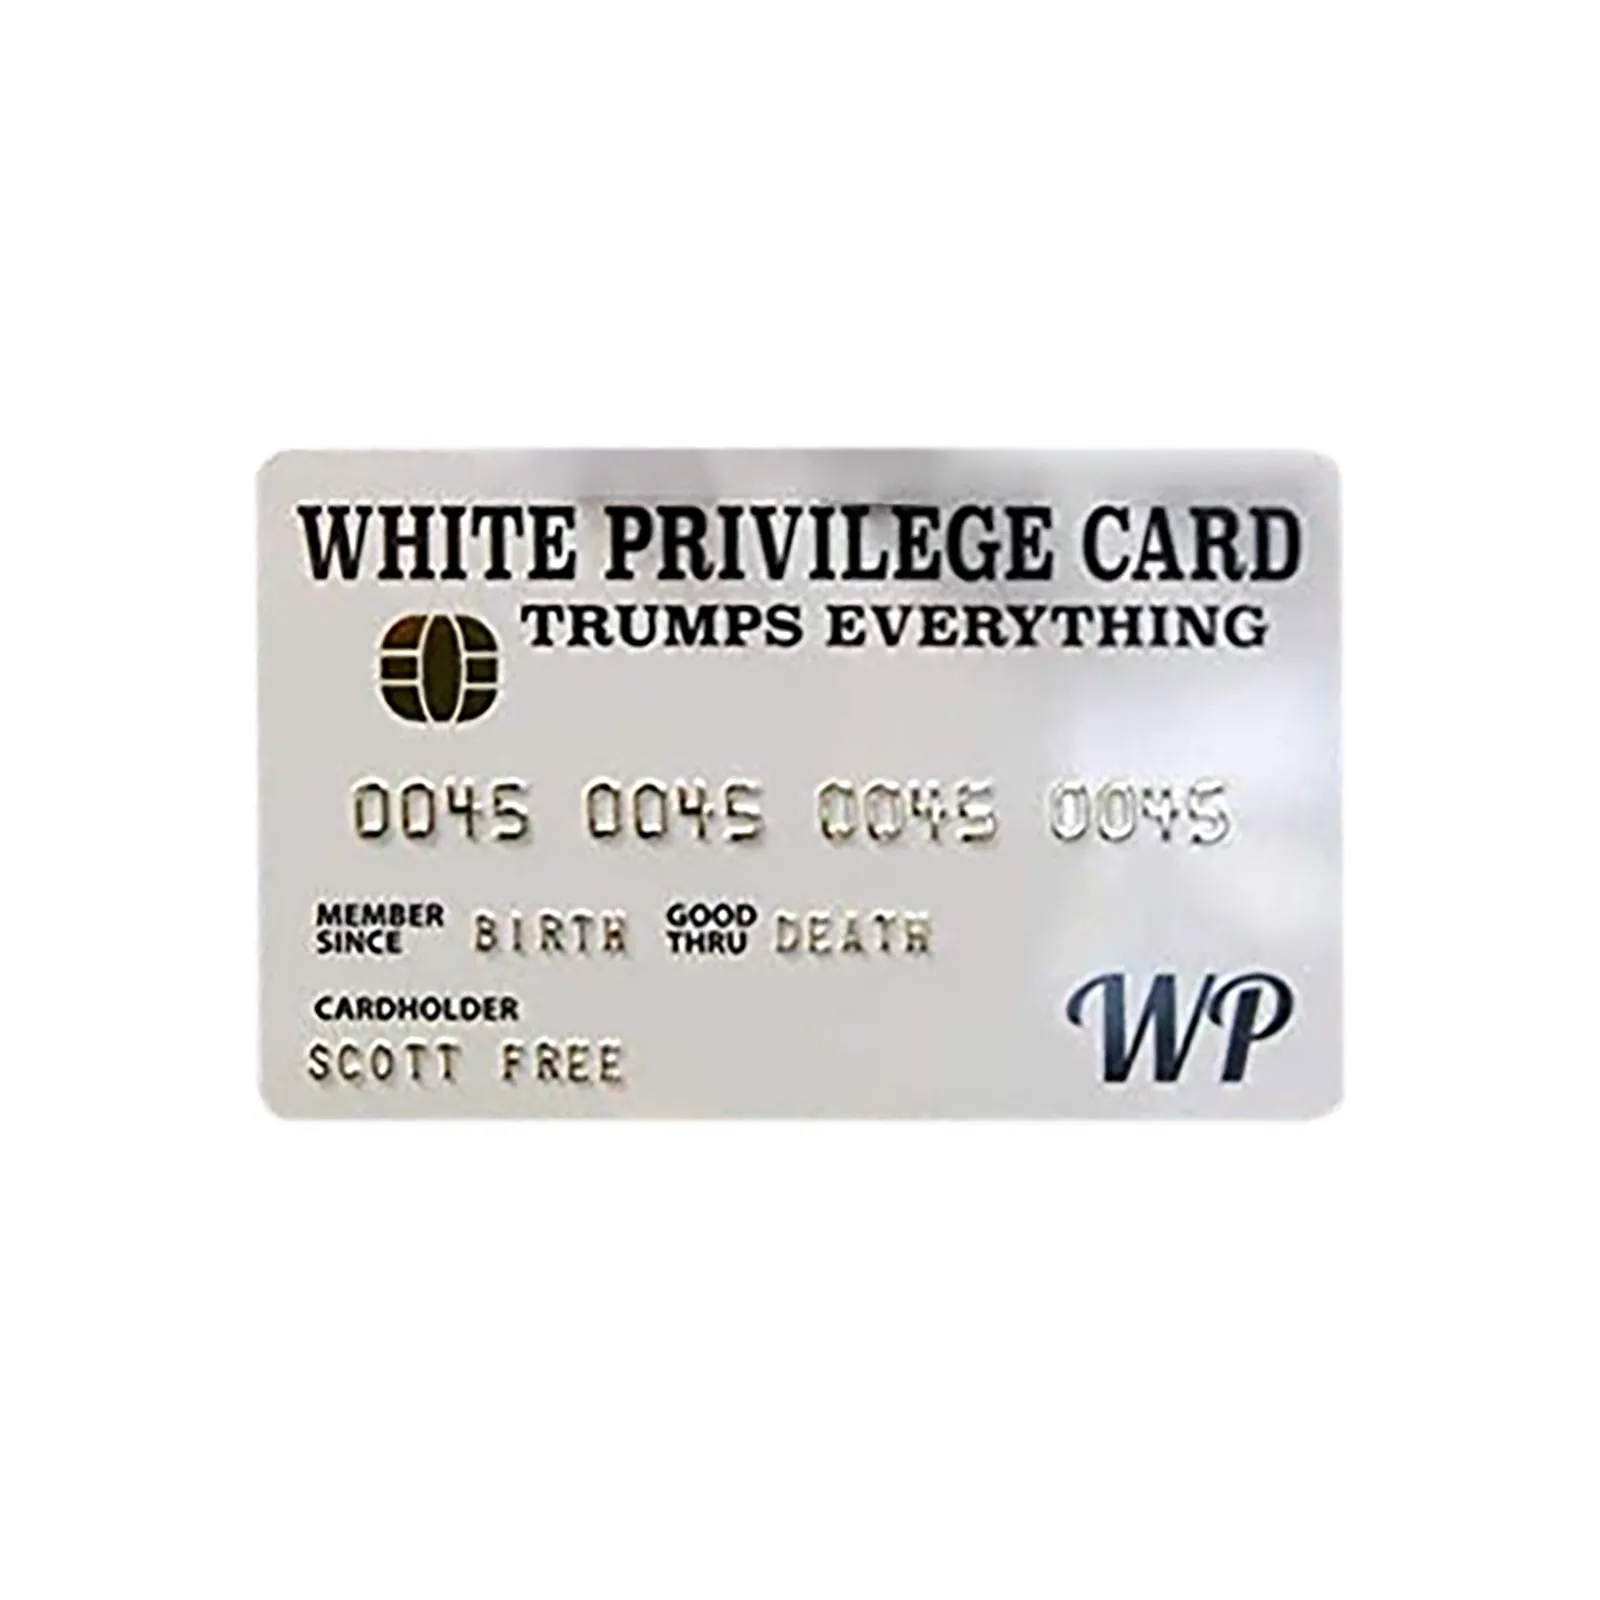 Inspirational Wallet Card Gifts Decal Card Anti Democrat Deposit White Privilege Deplorable Decal Anniversary Card Longgaohui White privilege card Trumps Everything PVC material status